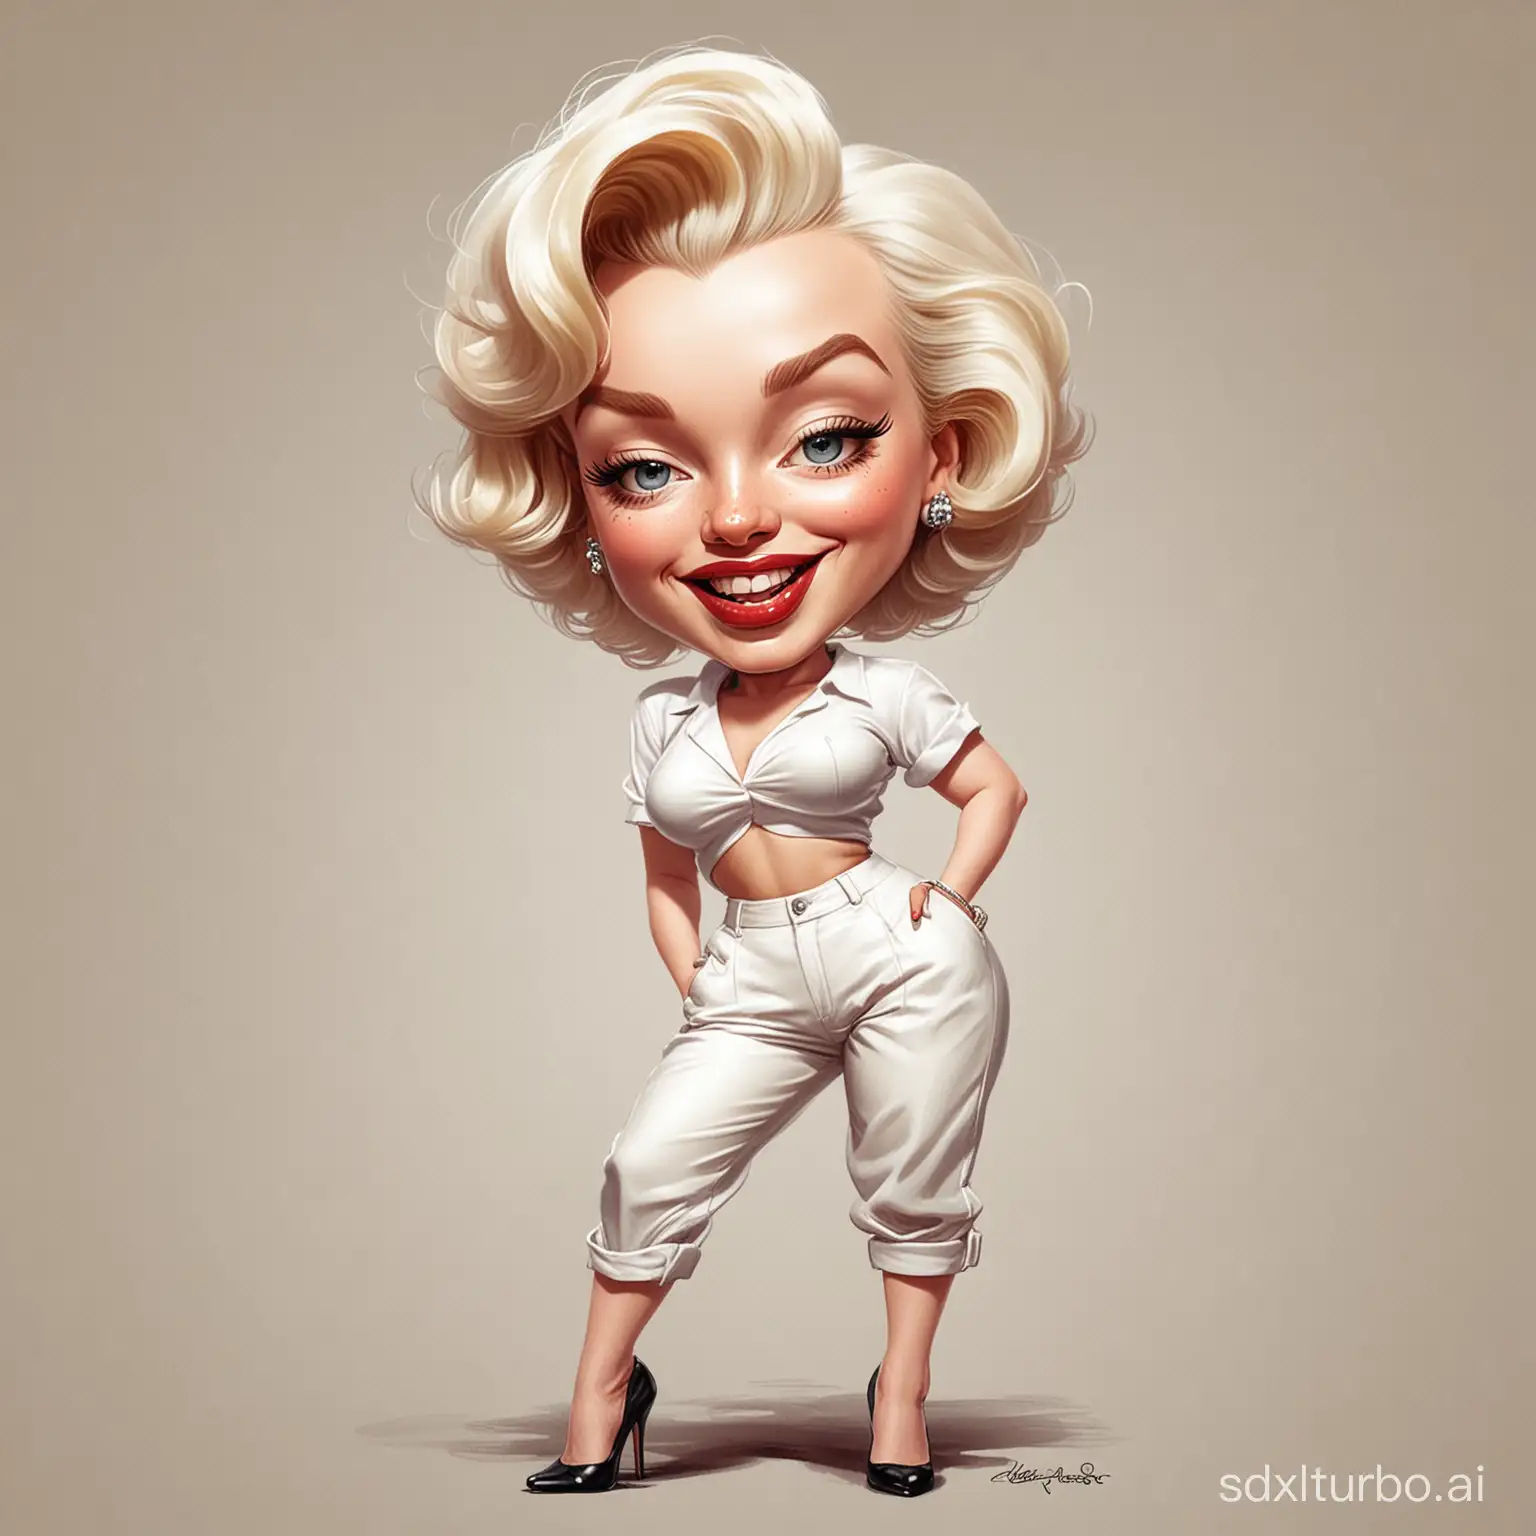 Caricature of a Marilyn Monroe wearing  kitty pants and white top